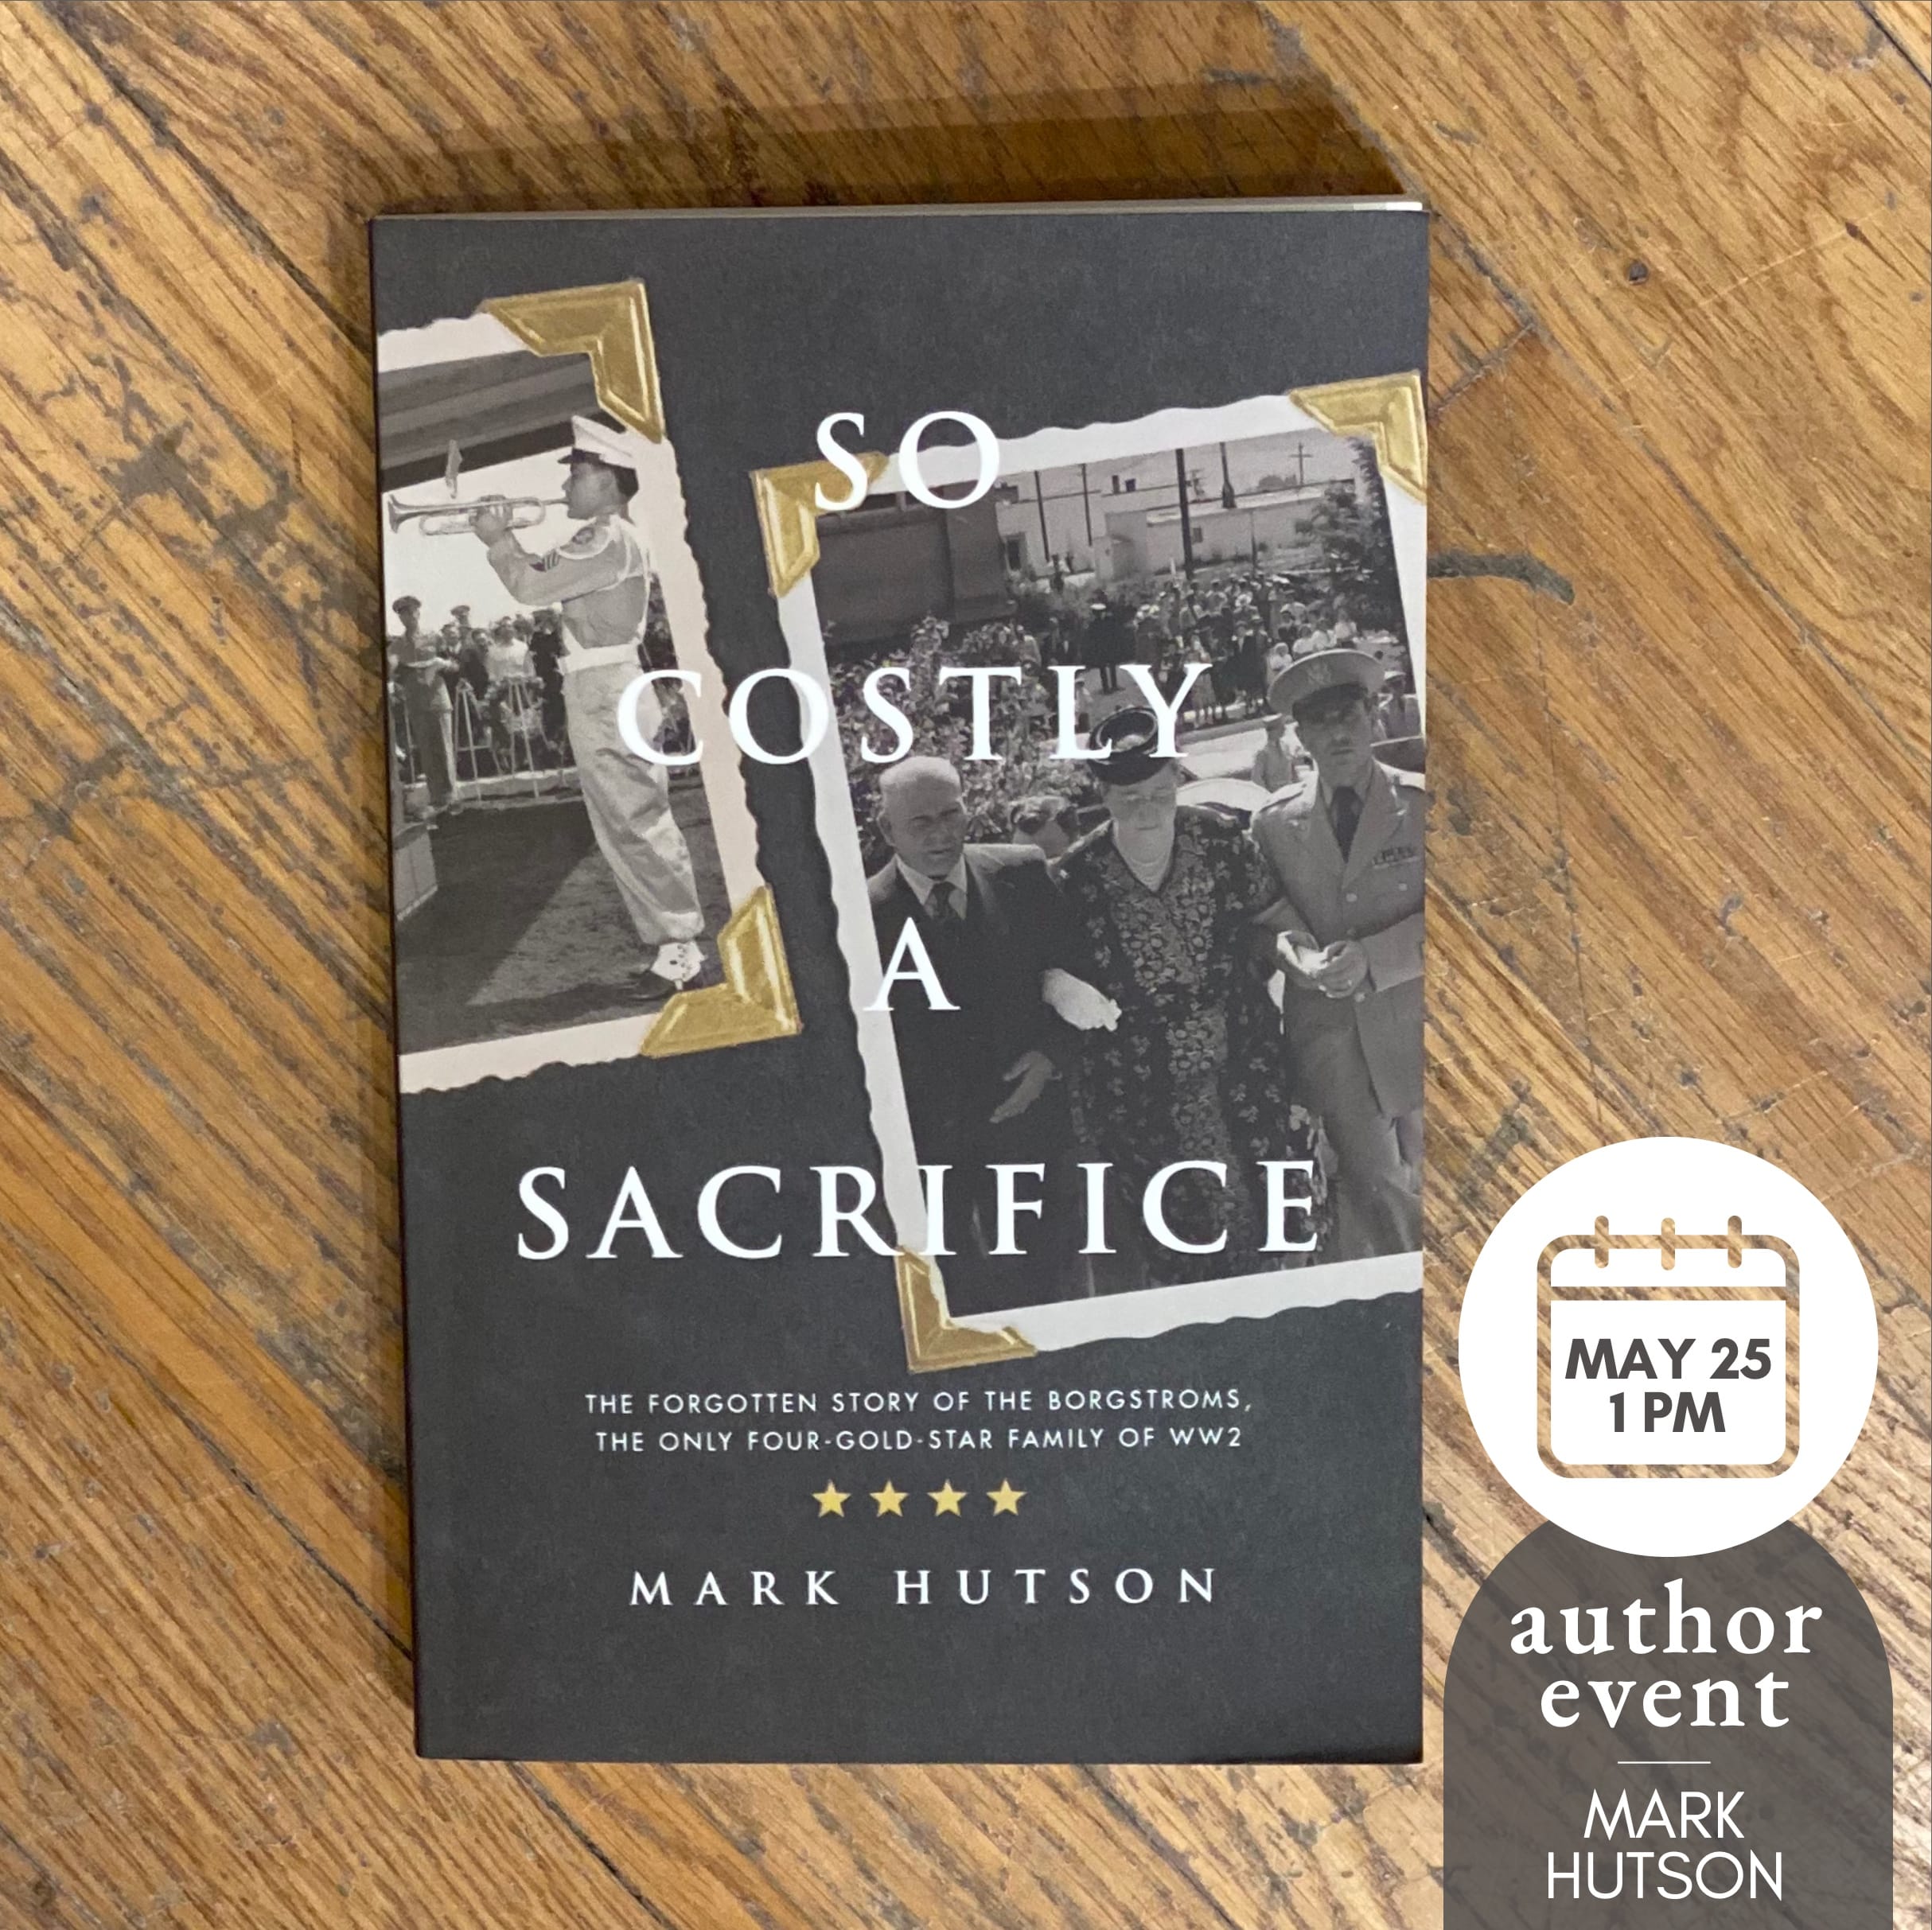 Event with Mark Hutson author of So Costly a Sacrifice